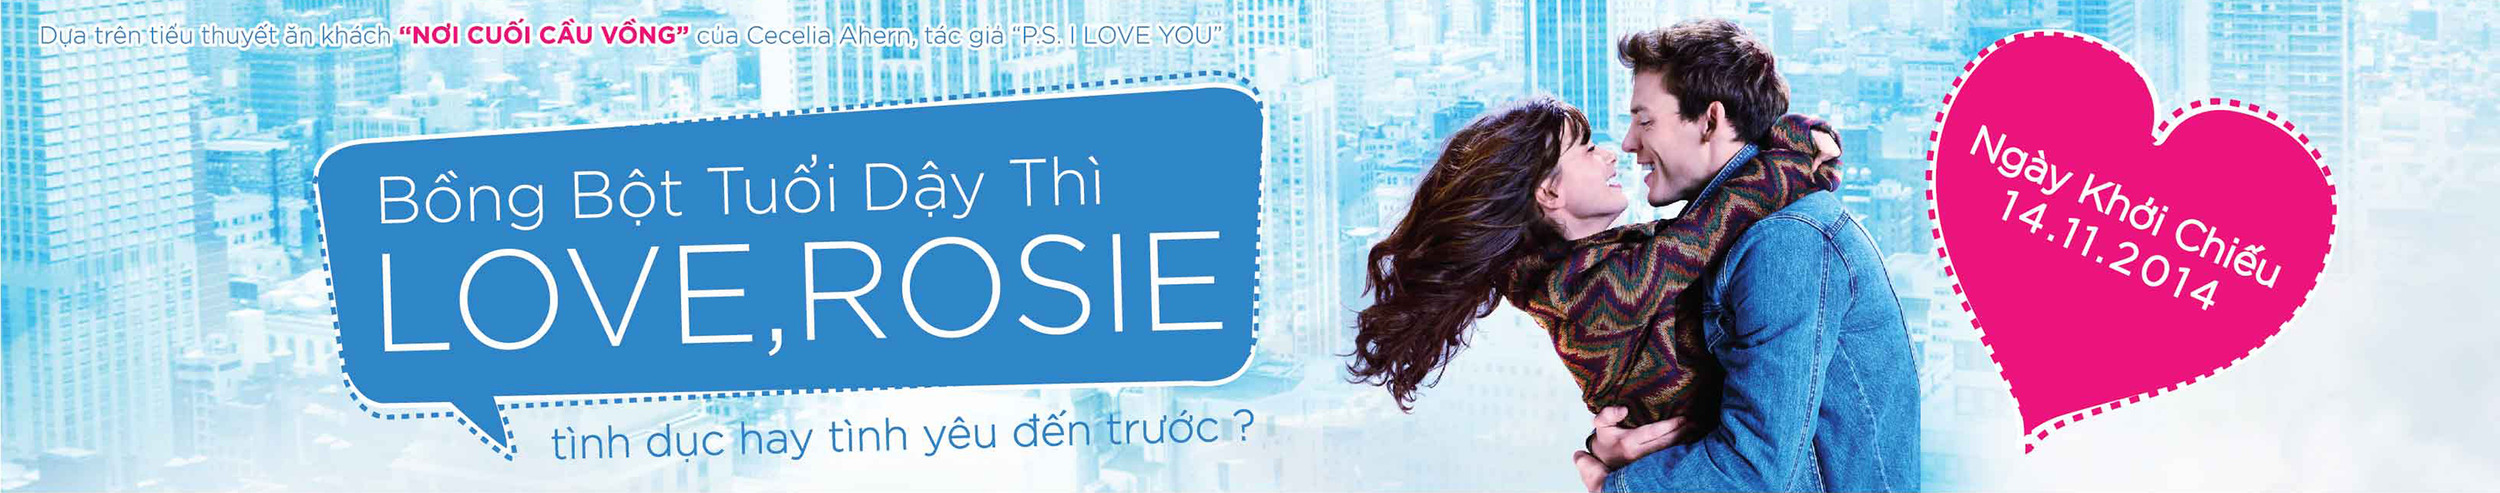 Extra Large Movie Poster Image for Love, Rosie (#11 of 11)